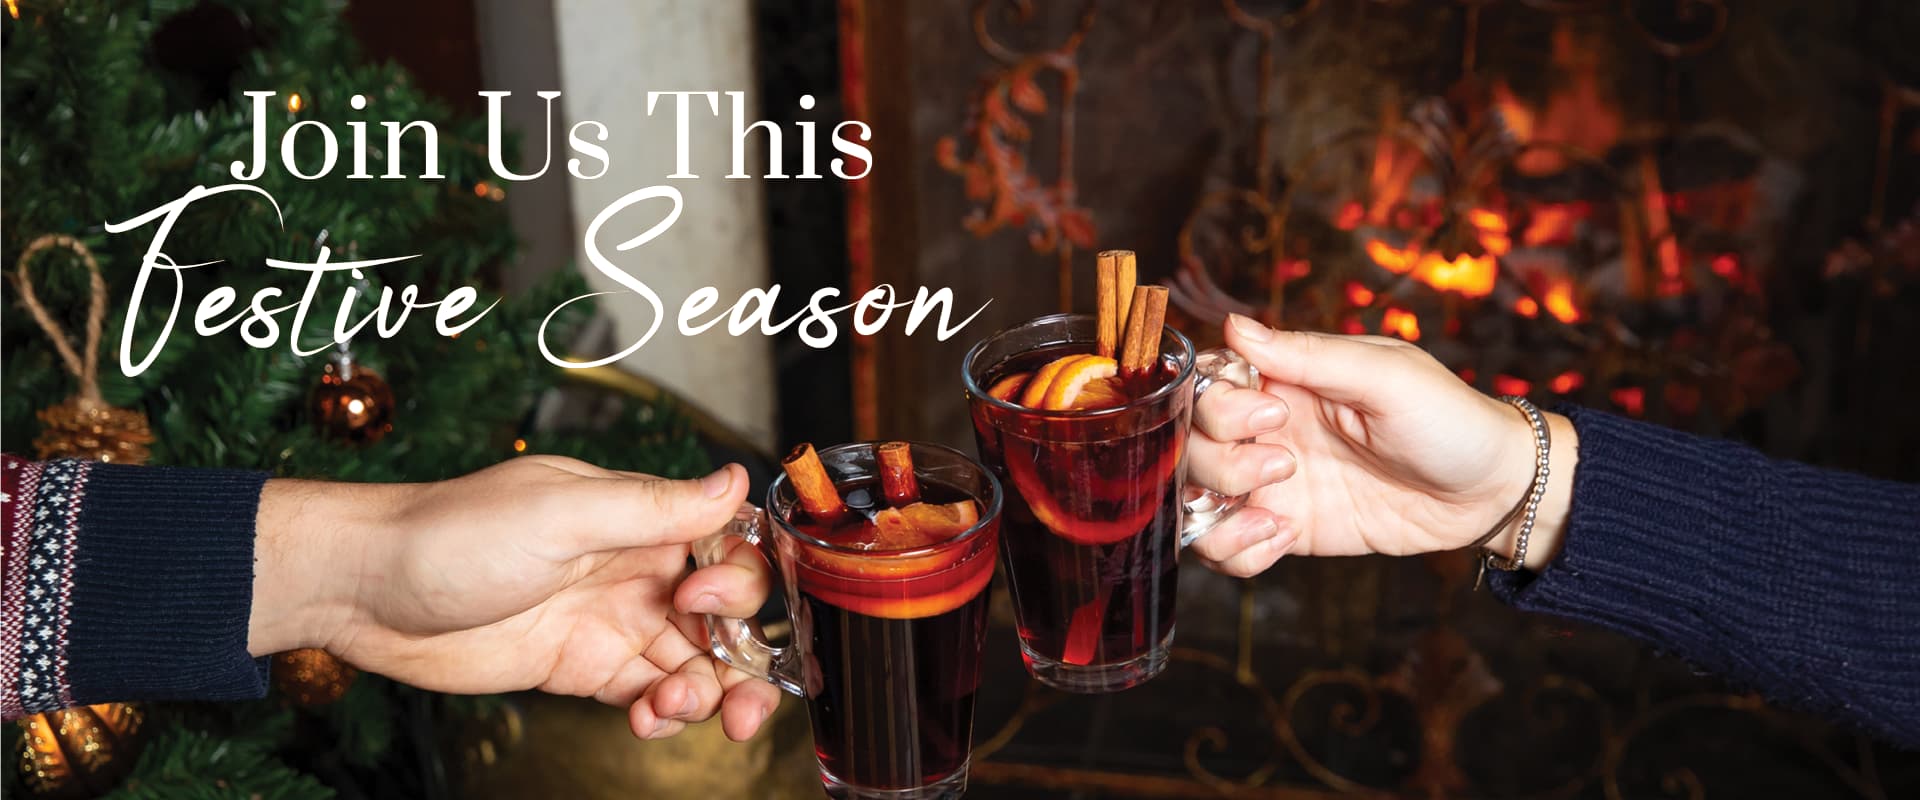 join us this festive season at Old Plough | Mulled Wine